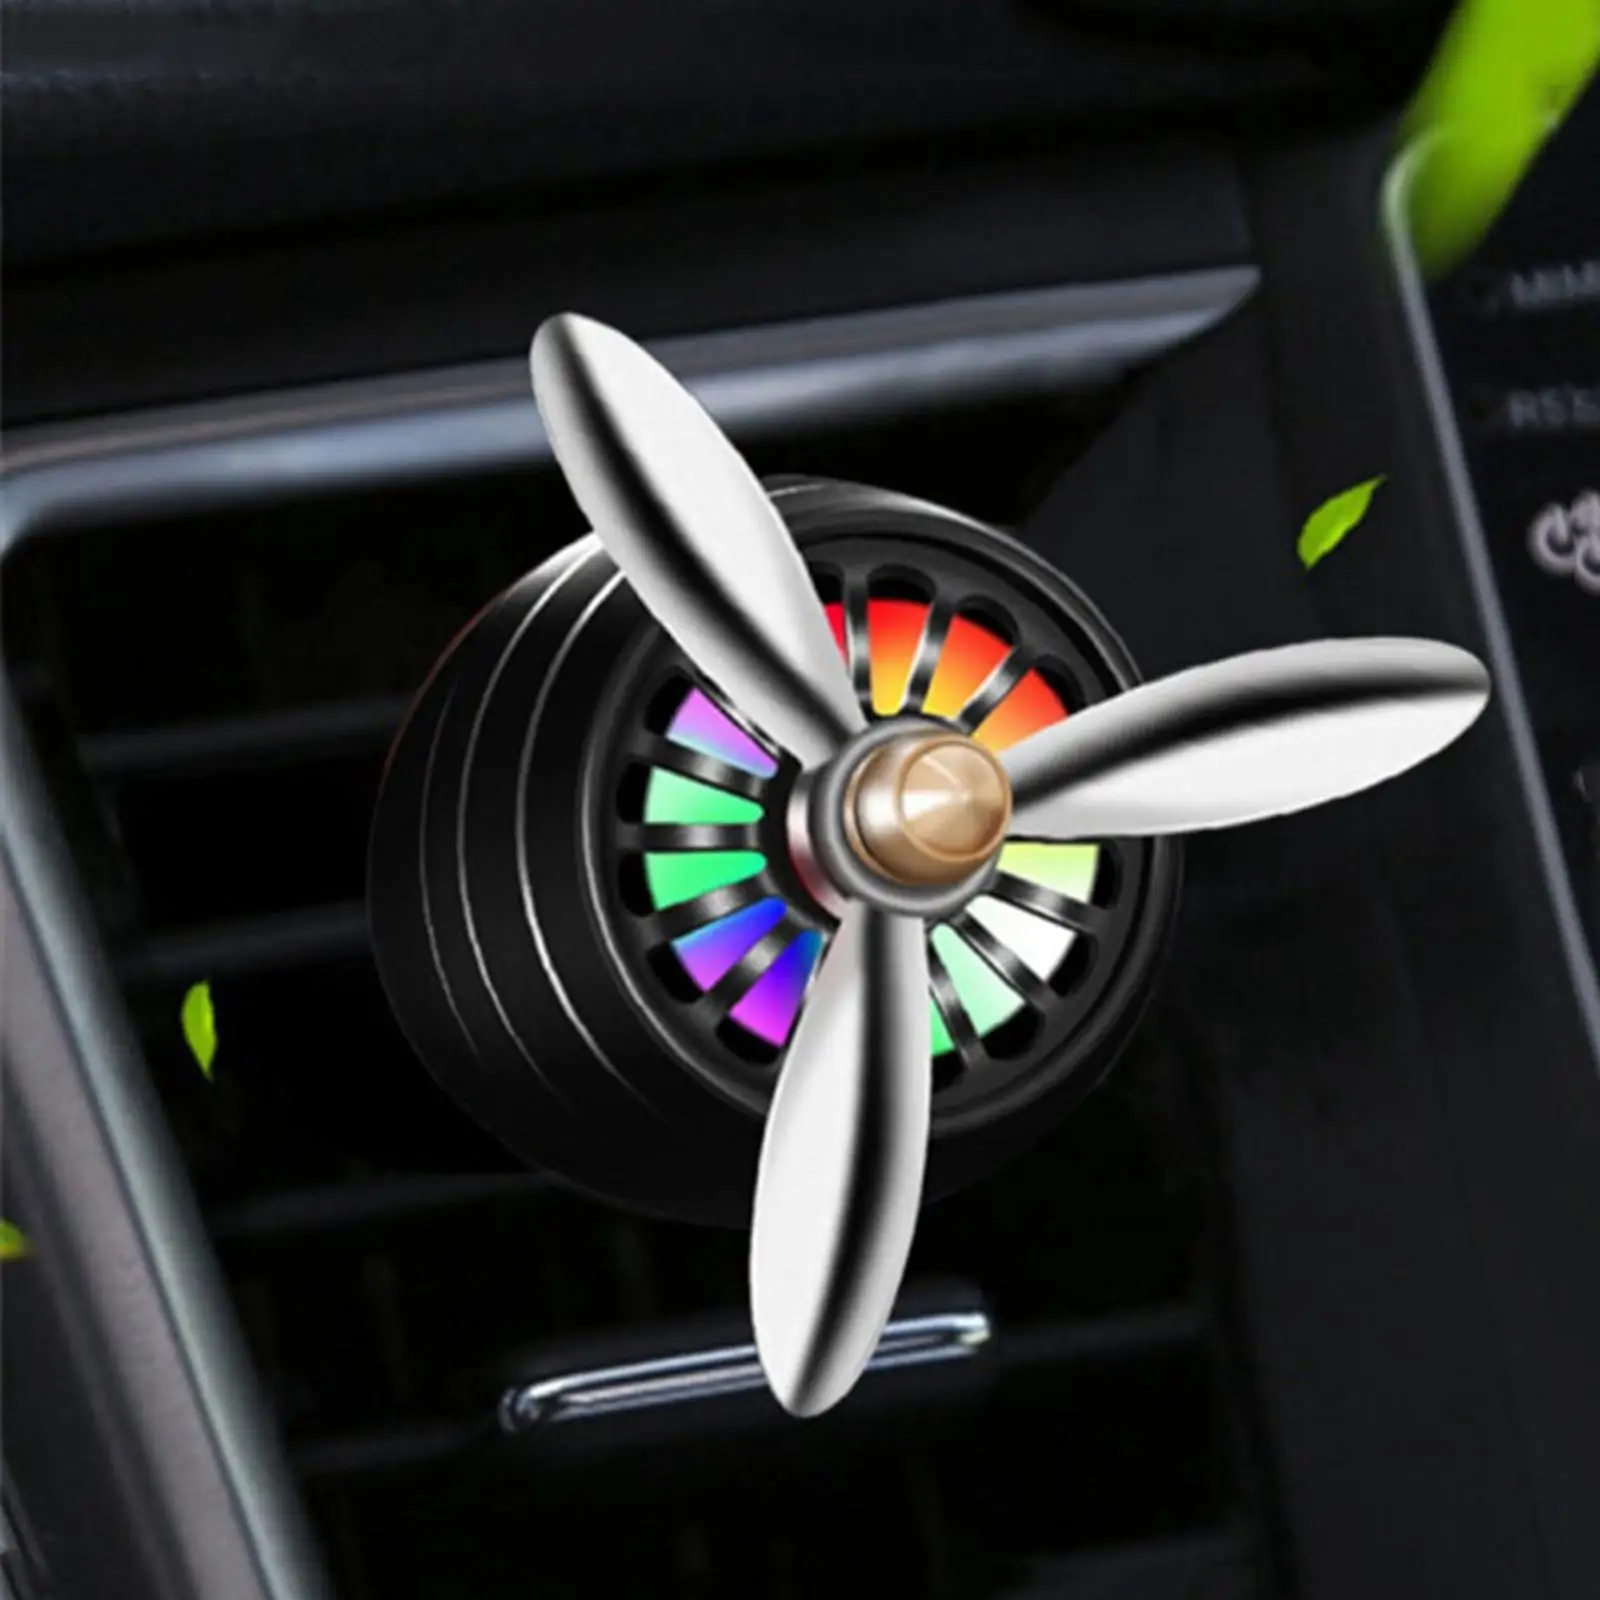 2X Car Air Freshener Fragrance Atmosphere for Auto Vent Outlet Daily